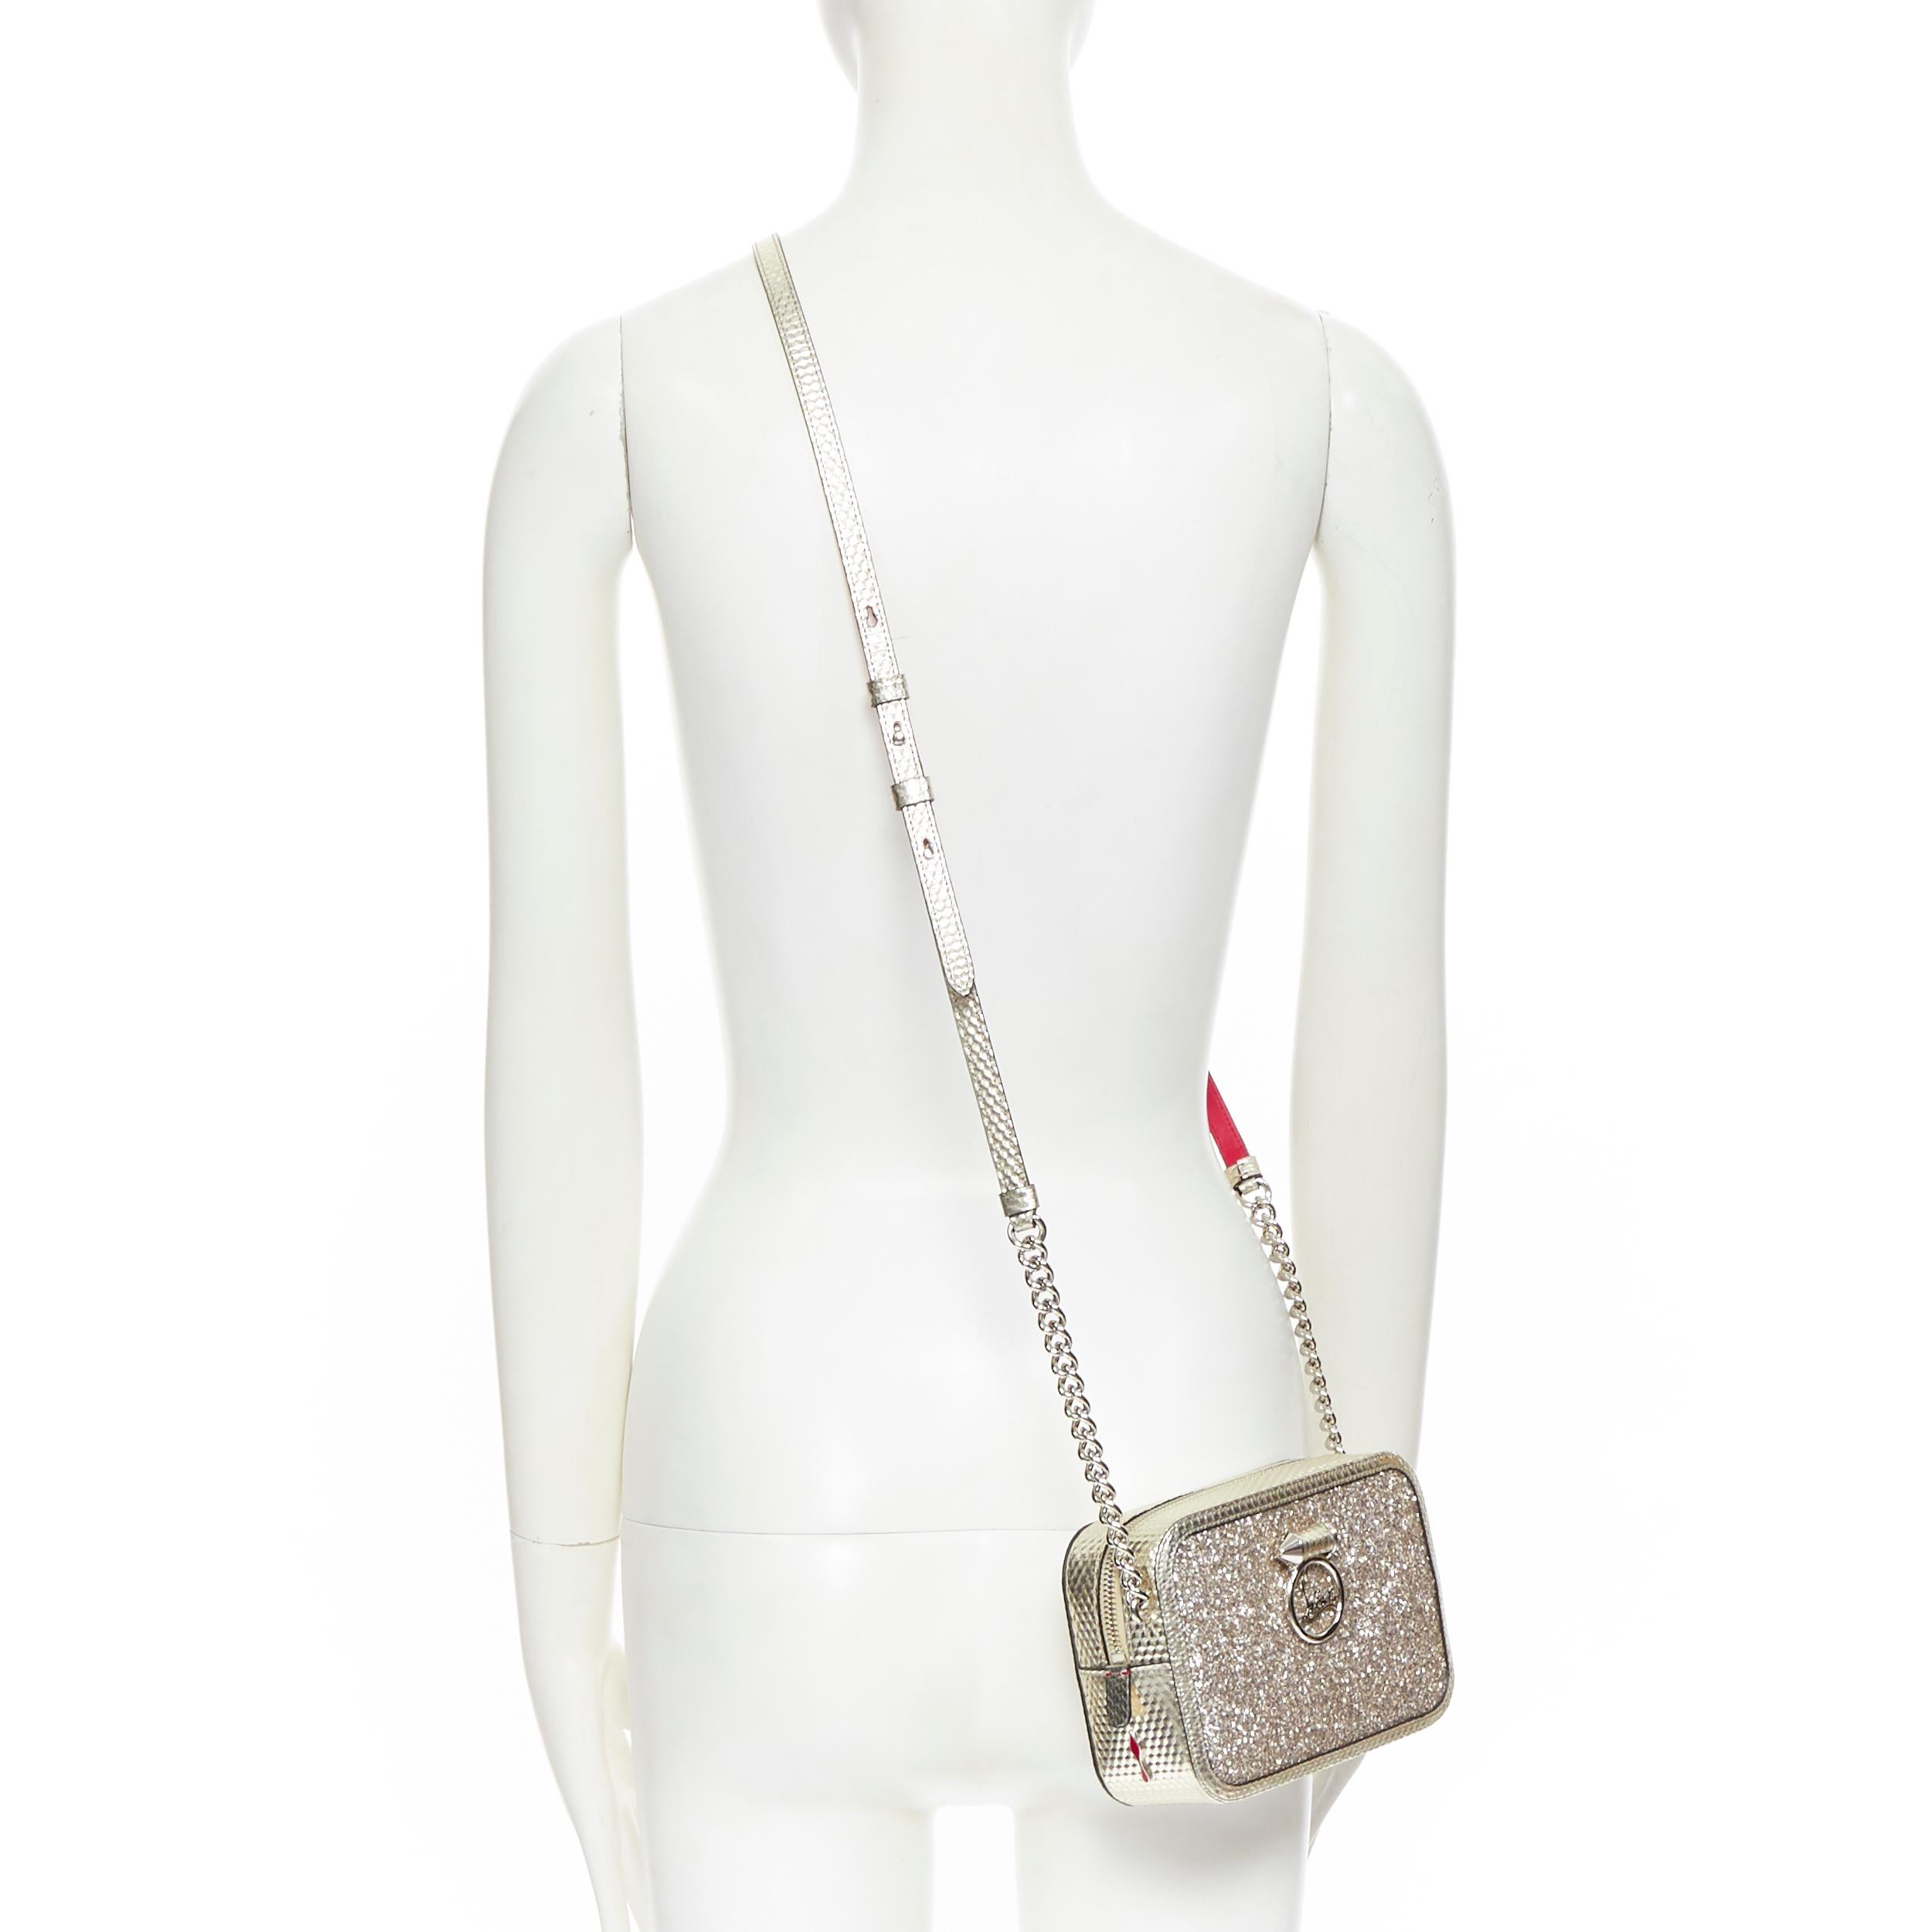 new CHRISTIAN LOUBOUTIN Rubylou Mini Perle Silver glitter crossbody box bag
Brand: Christian Louboutin
Designer: Christian Louboutin
Model Name / Style: Rubylou Mini
Material: Leather
Color: Silver
Pattern: Solid
Extra Detail: Textured metallic